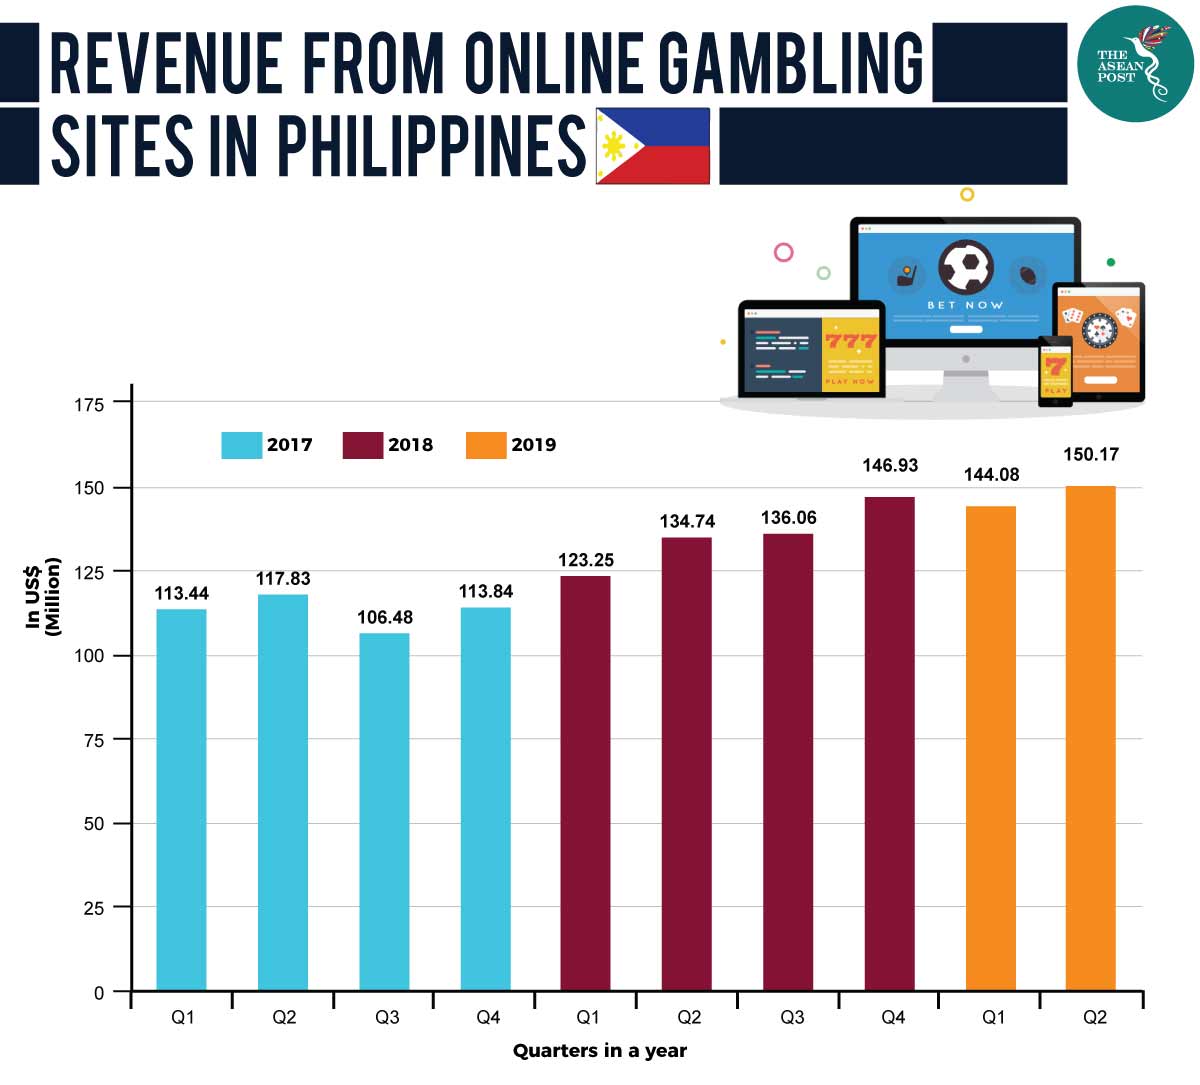 download the rise of gaming revenue visualized for free